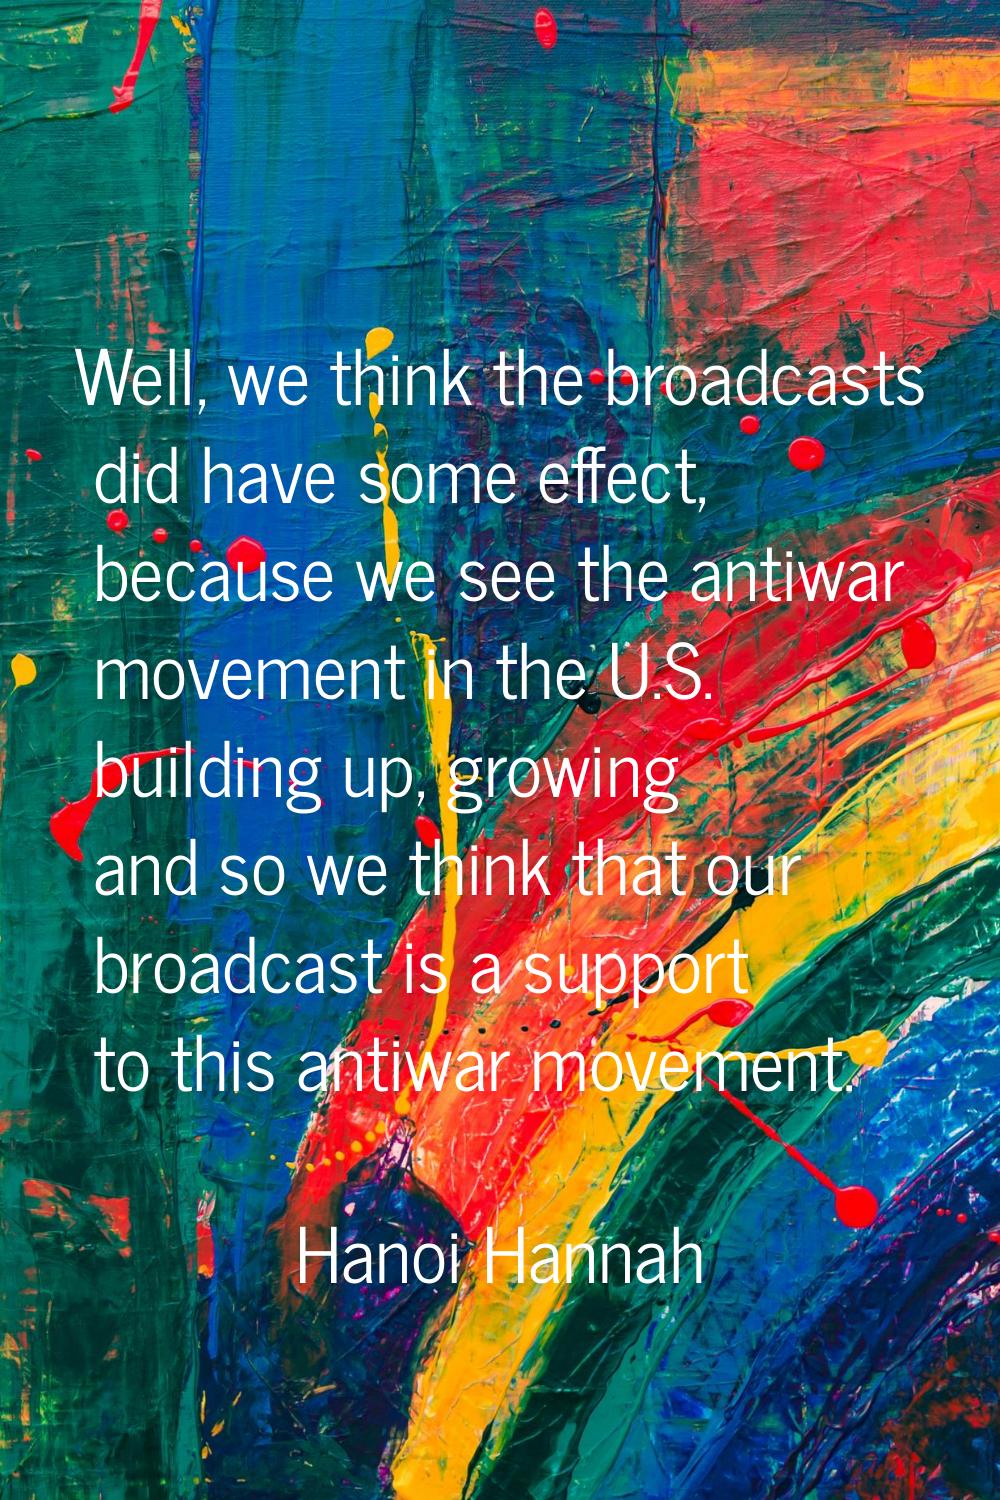 Well, we think the broadcasts did have some effect, because we see the antiwar movement in the U.S.